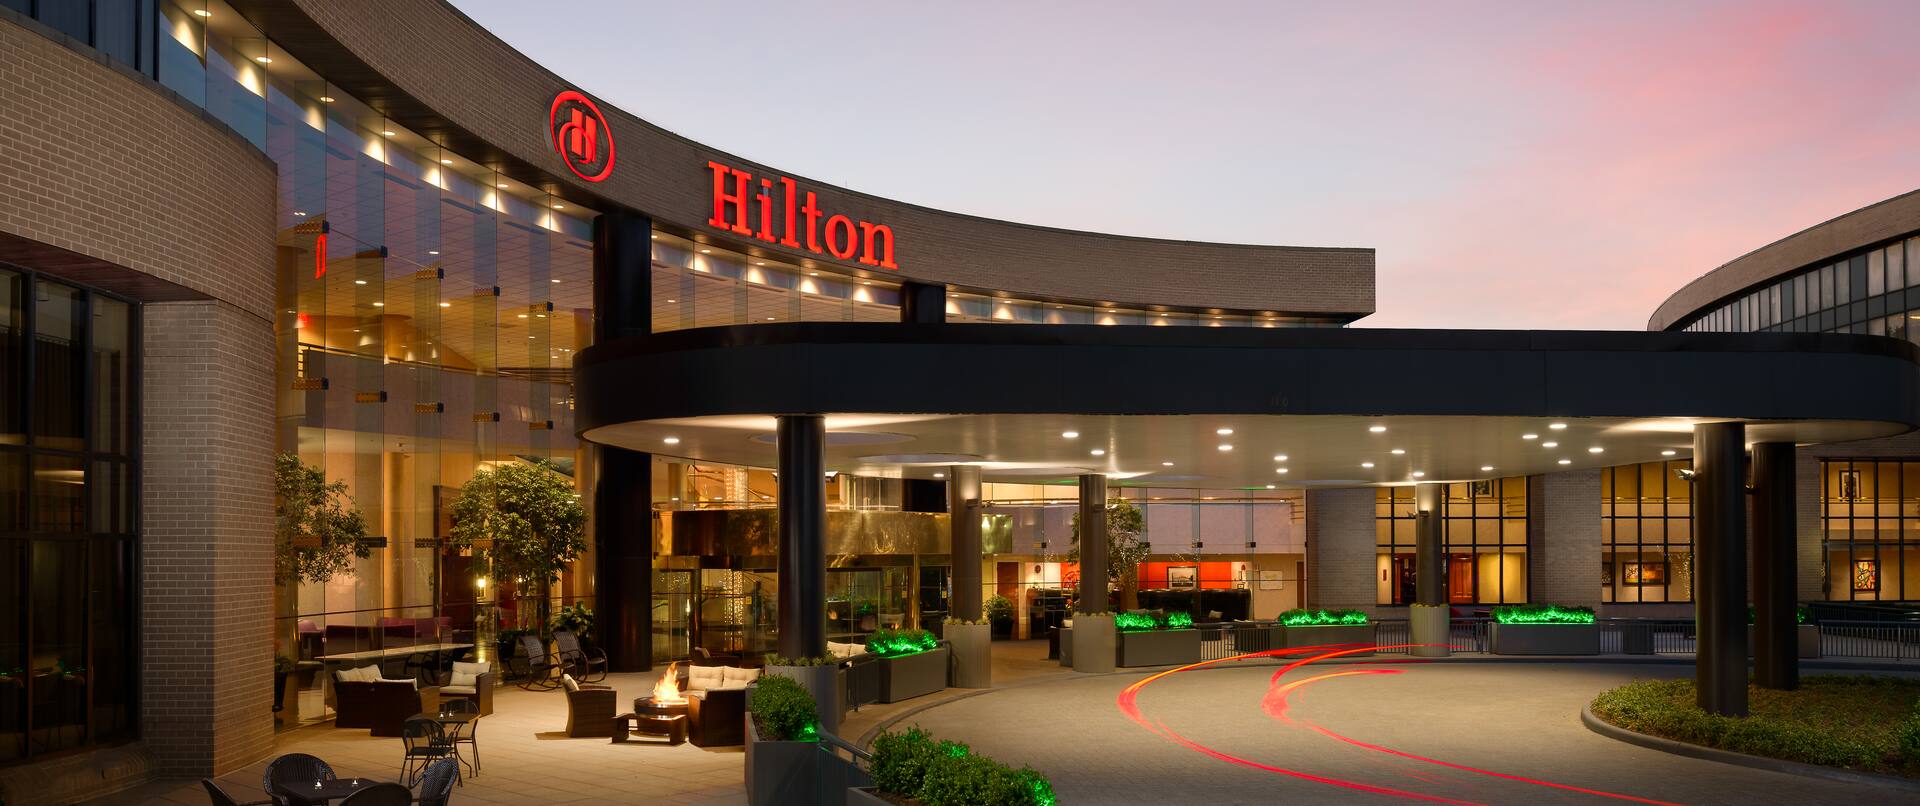 Exterior Entrance to Hilton Hotel at Sunset